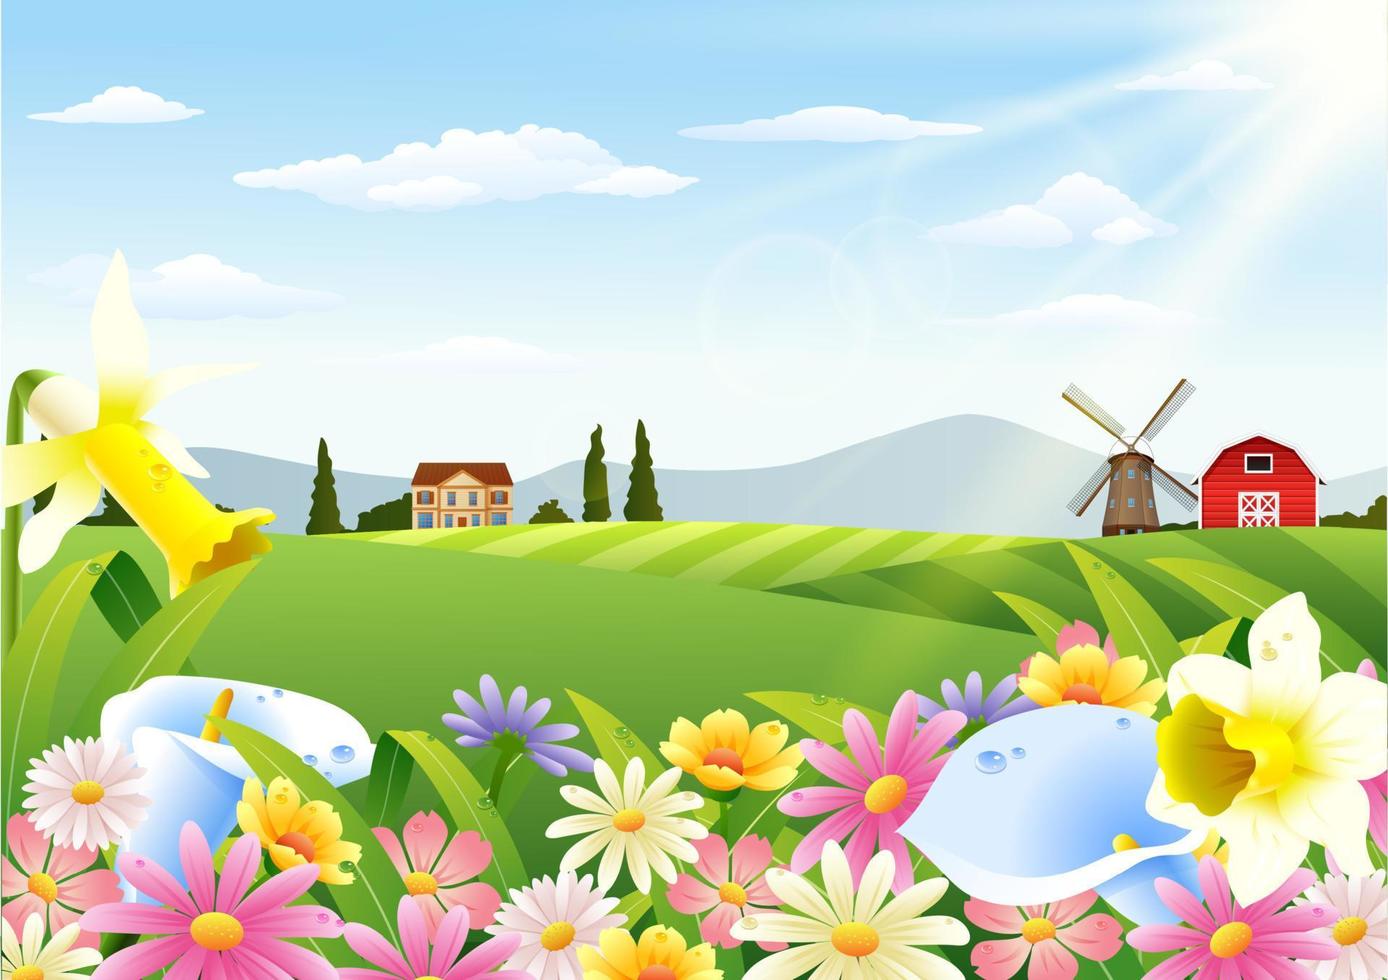 Rural landscape with blooming flowers at spring time vector